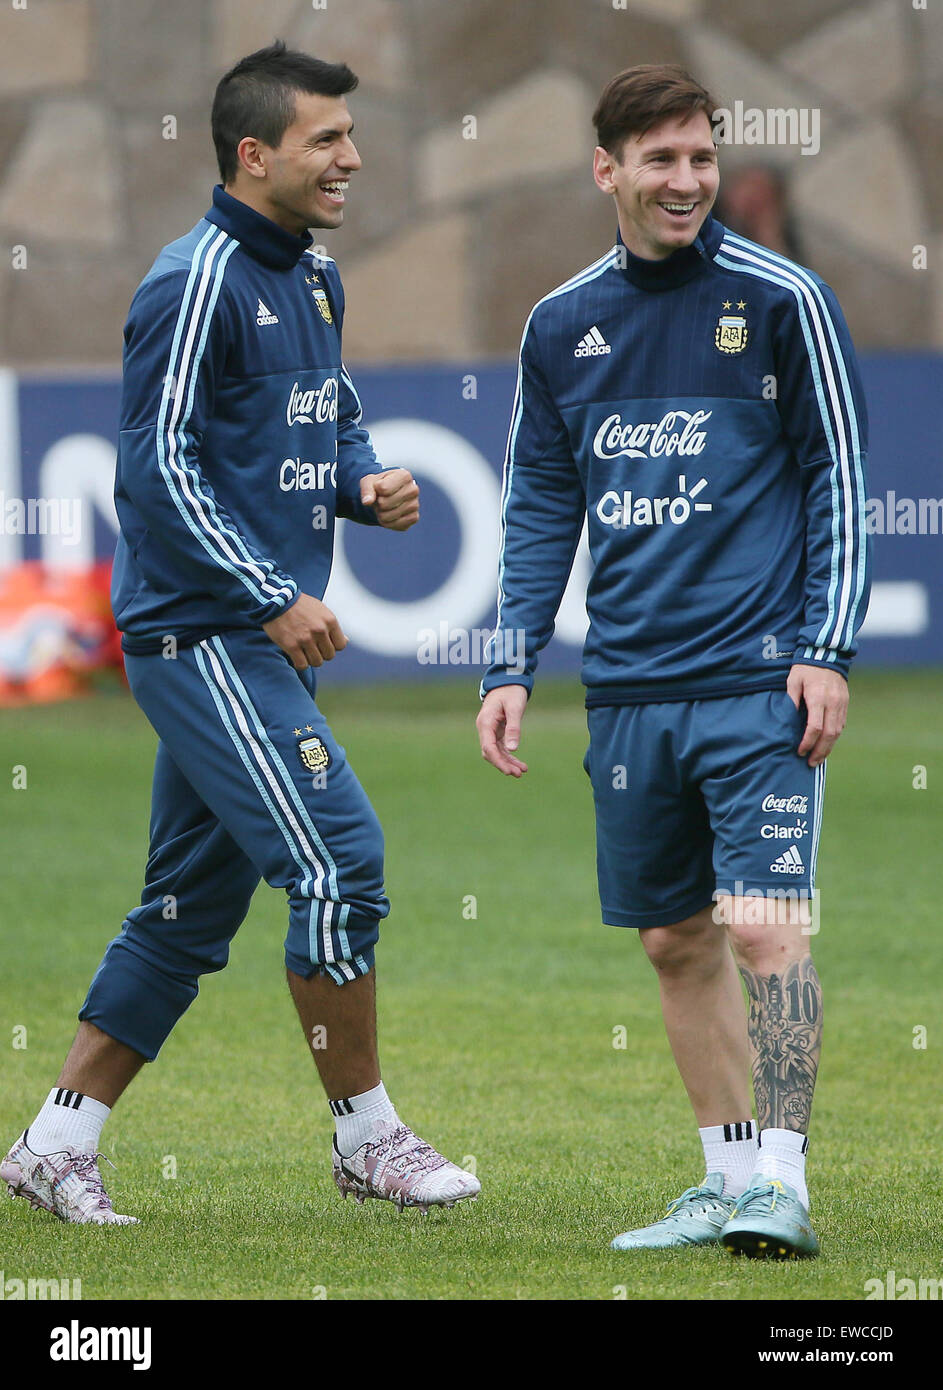 La Serena, Chile. 22nd June, 2015. Argentina's Sergio Aguero (L) and Lionel Messi take part in a training session, in La Serena, Chile, on June 22, 2015. Argentina will face Colombia, in the quarterfinal match of the Copa America Chile 2015 on June 26. Credit:  Claudio Fanchi/TELAM/Xinhua/Alamy Live News Stock Photo